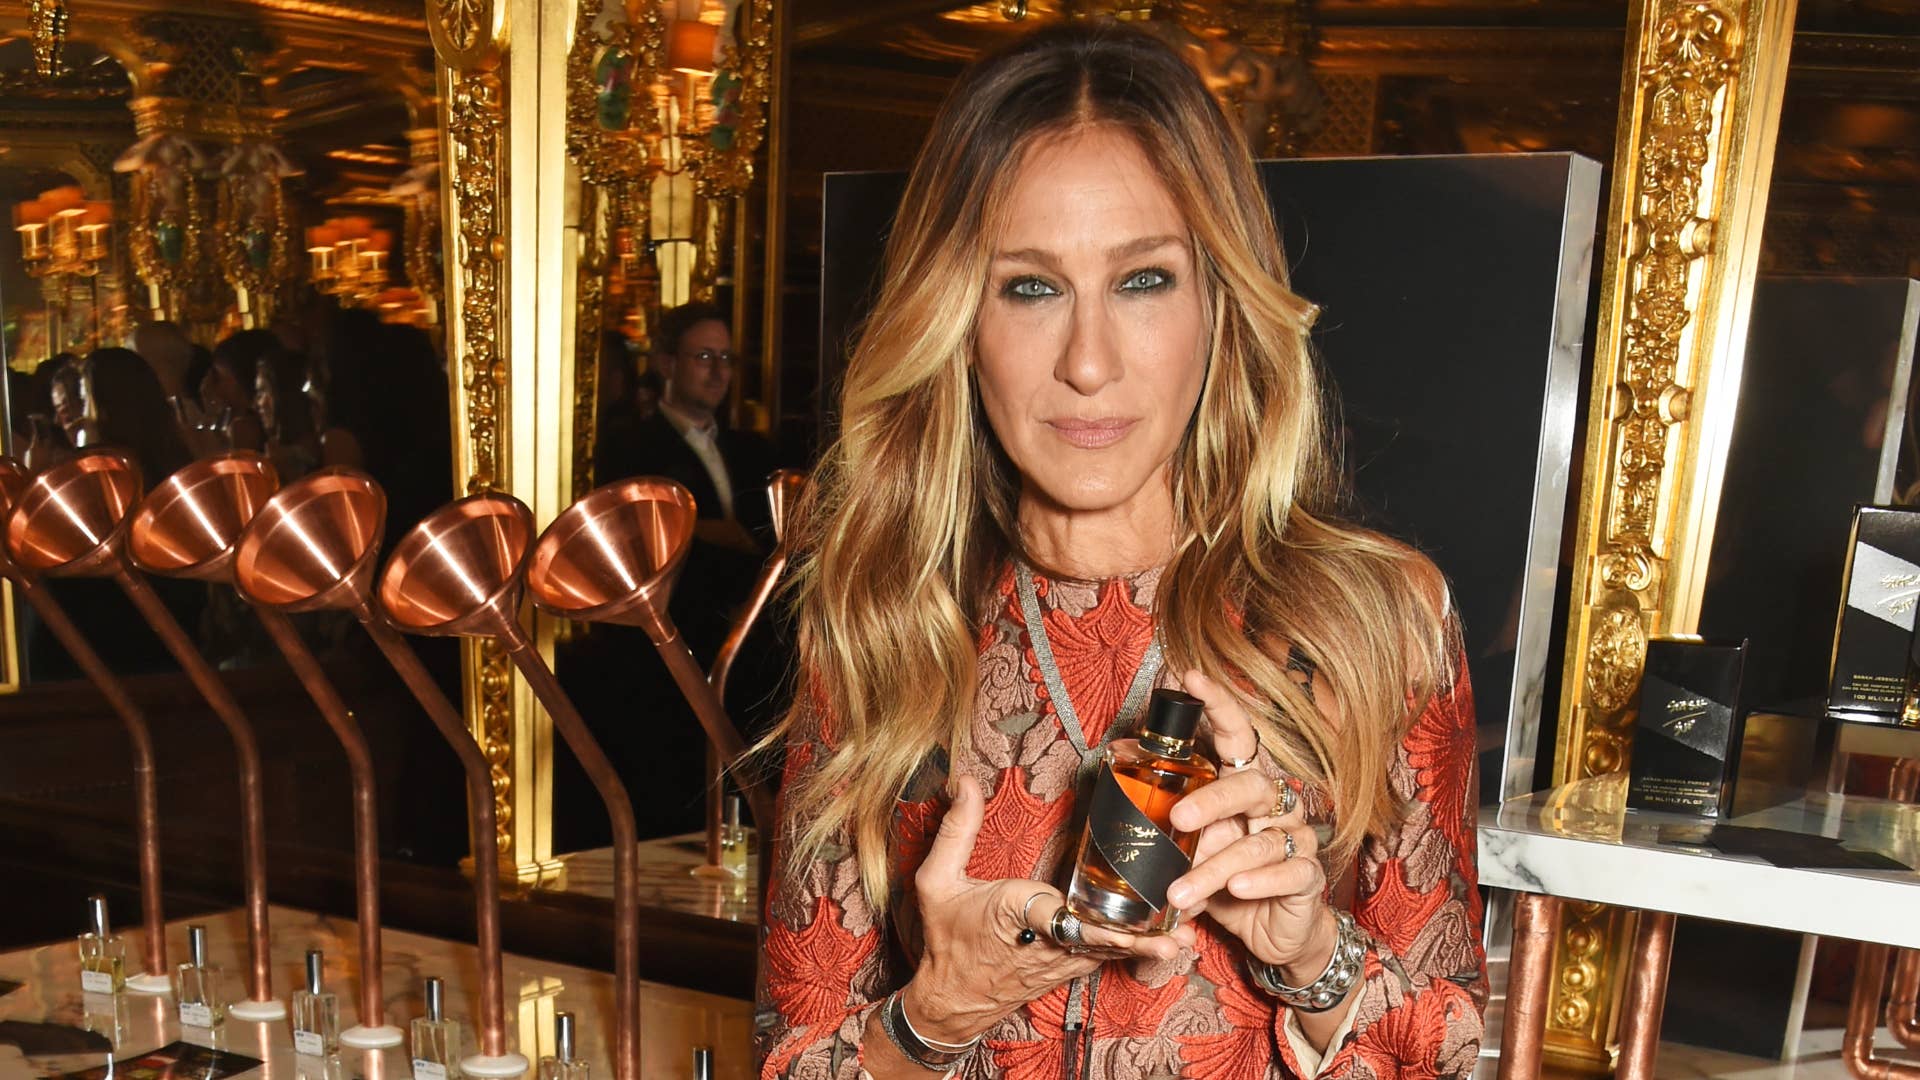 Sarah Jessica Parker launches her latest fragrance 'Stash.'